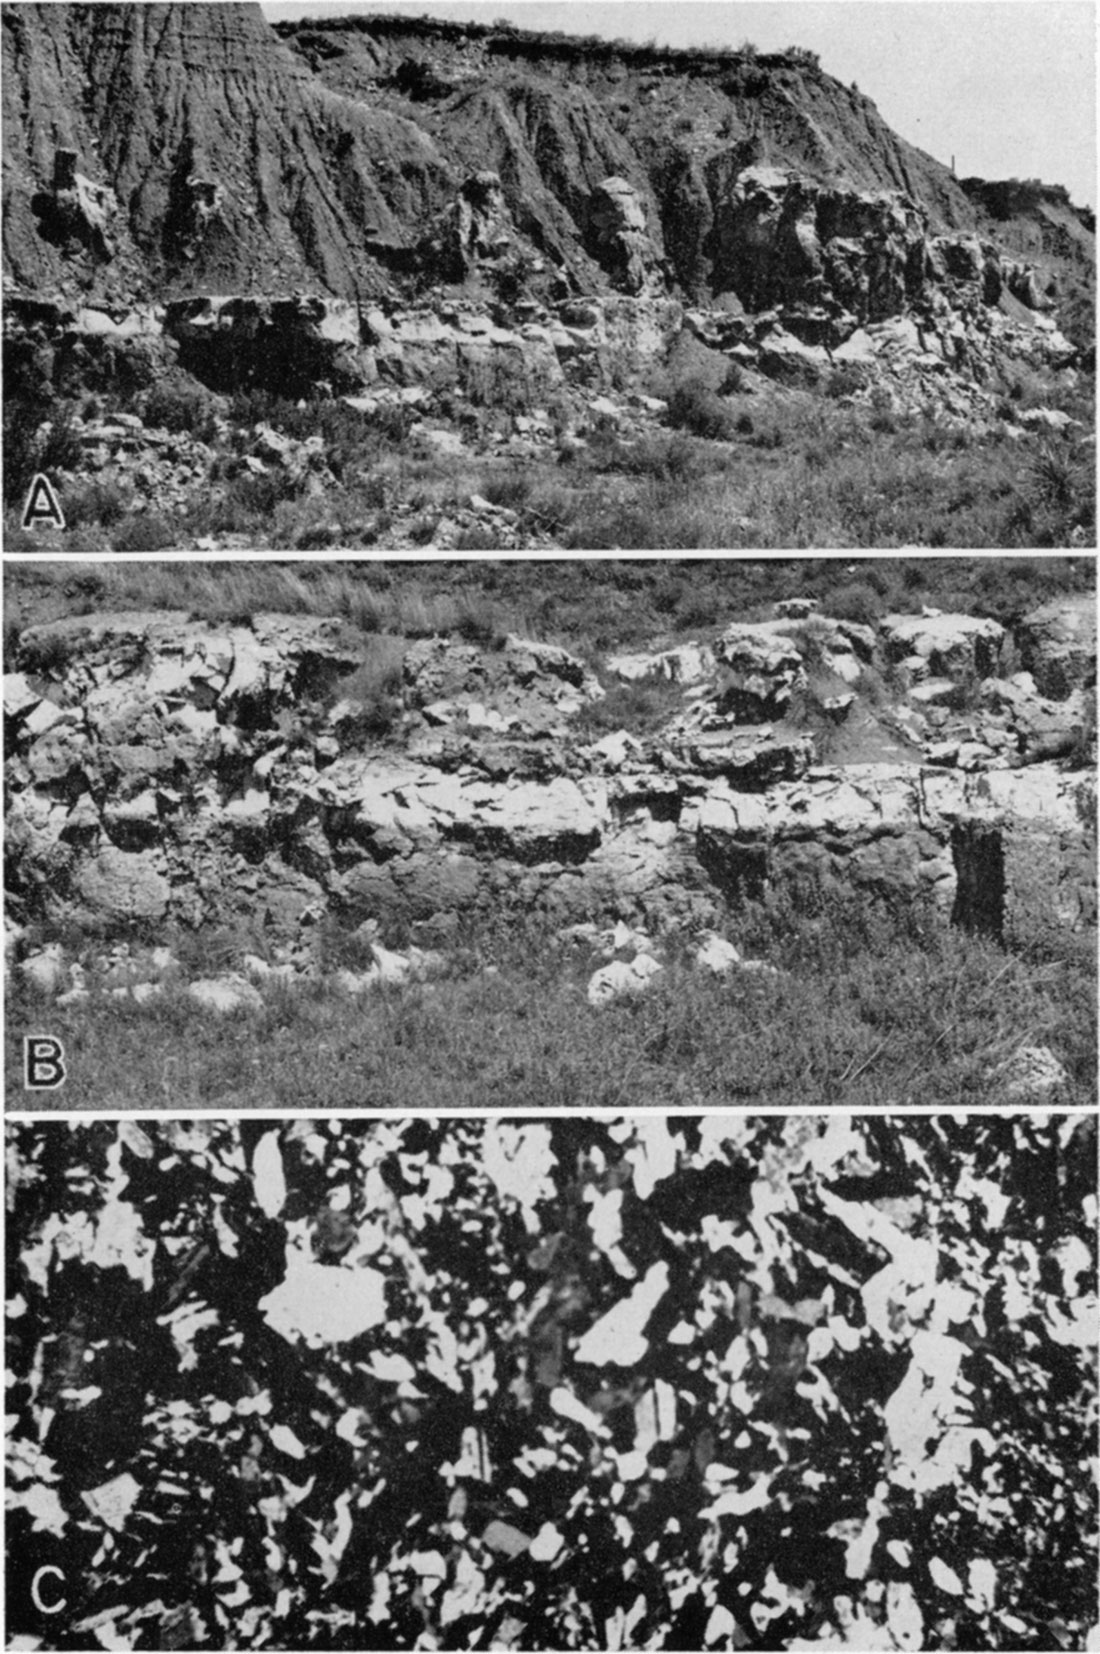 Three black and white photos; Top two are of outcrops of Dog Creek Shale and Medicine Lodge Gypsum; Bottom is photomicrograph of gypsum.